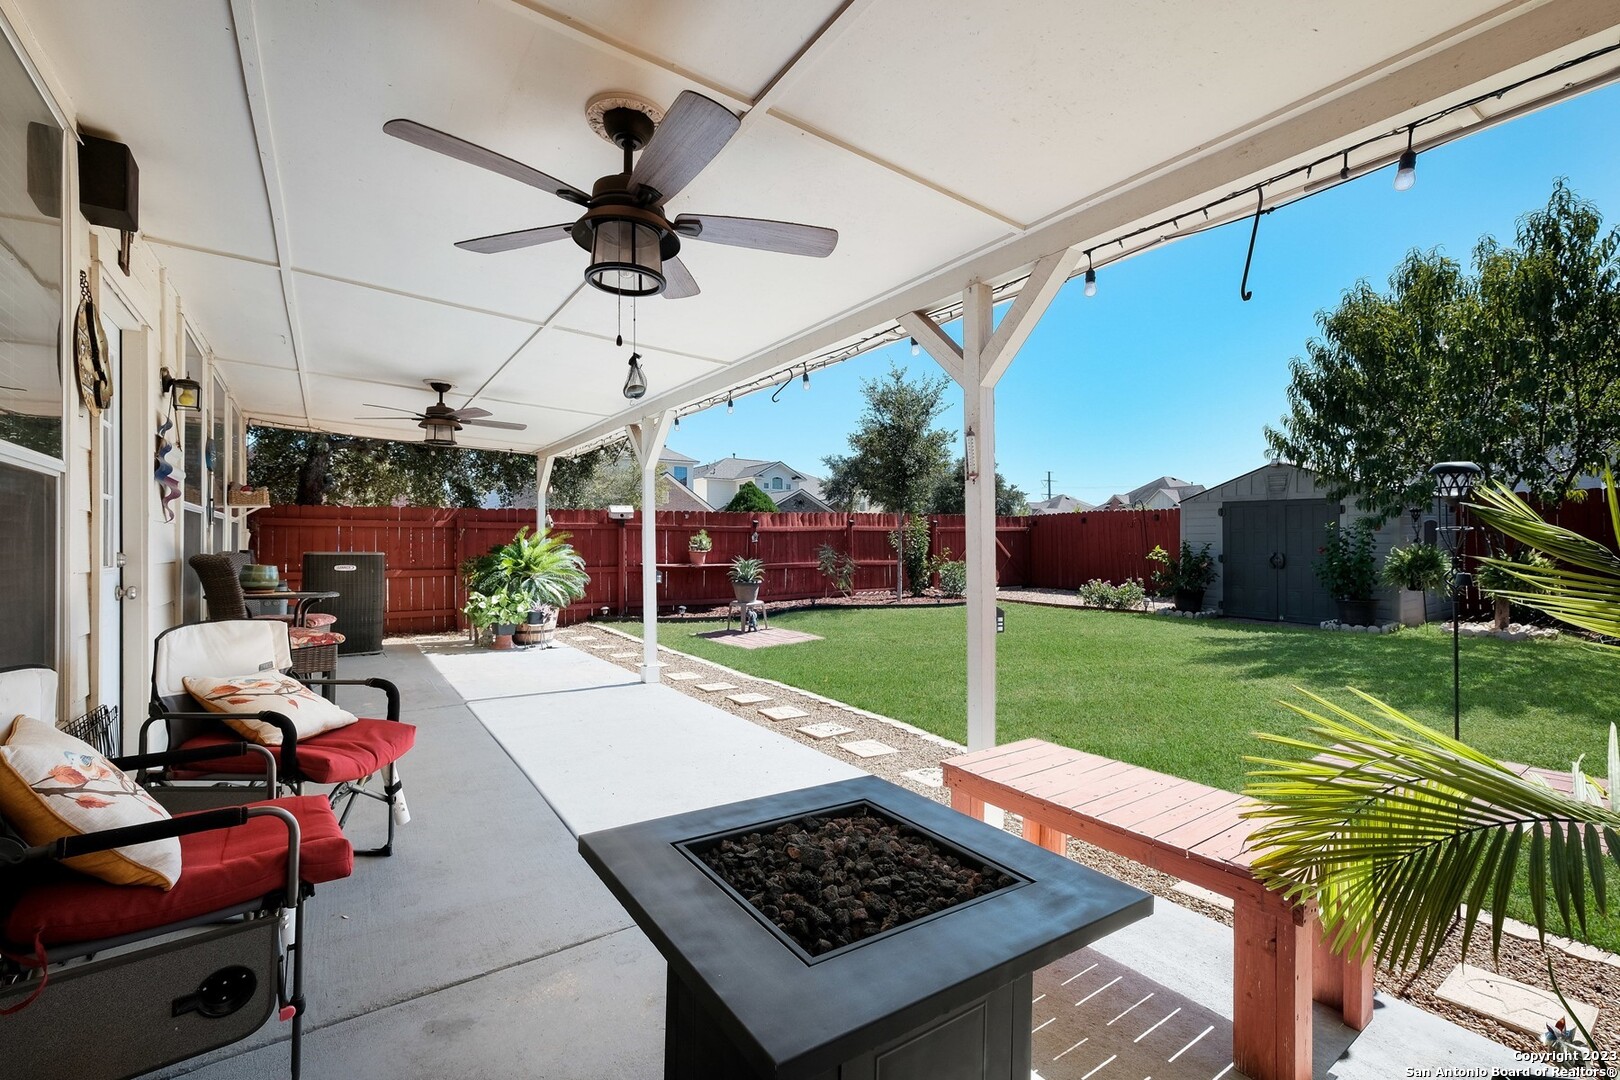 a view of a backyard with garden and a patio